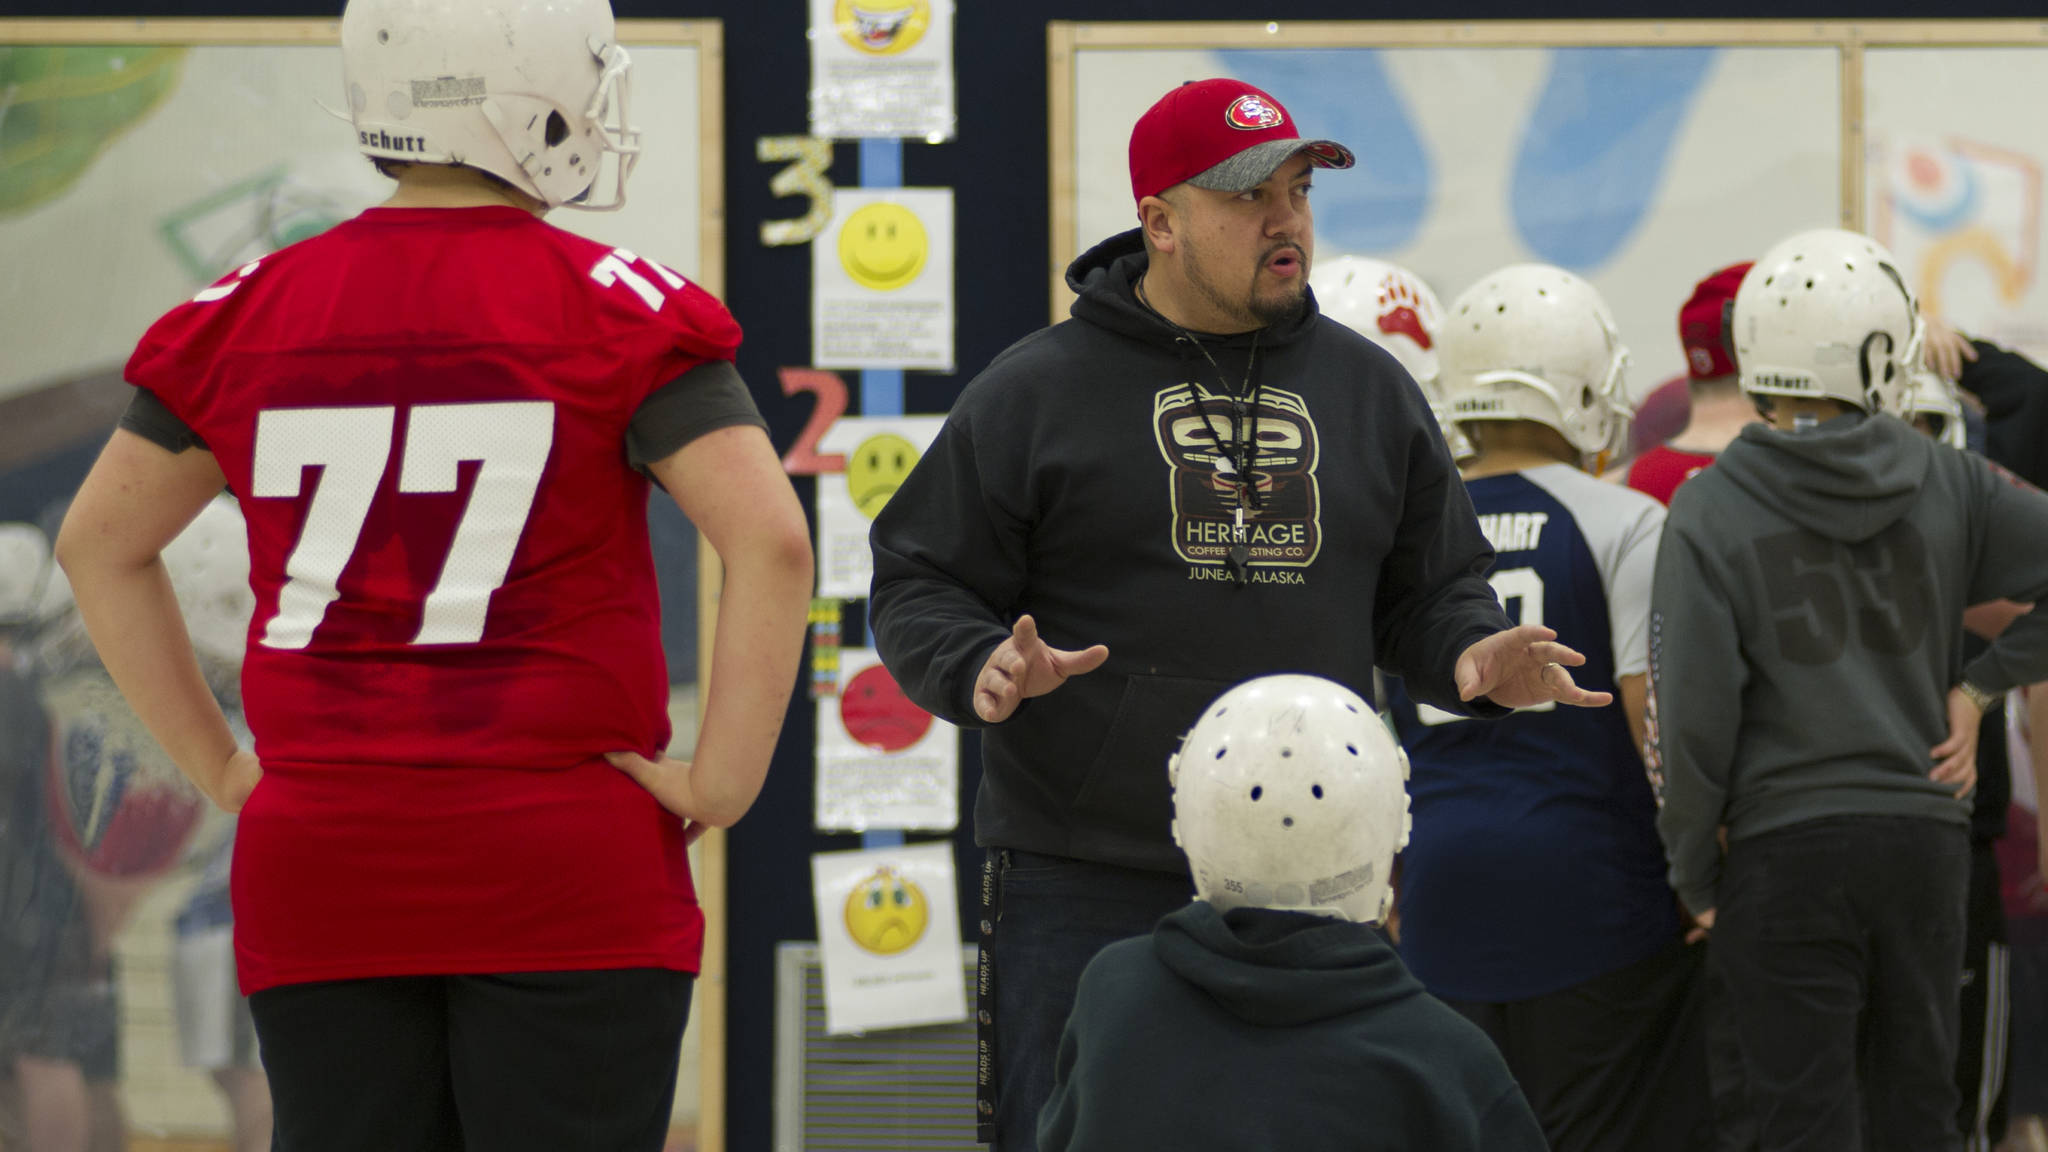 Juneau Youth Football League coach Marcos Morehouse instructs several 49ers players at a weeknight practice at Glacier Valley Elementary School, Wednesday, Nov. 15, 2017. The youth football team travels this week to Las Vegas, Nevada, for the National Youth Football Championships where they will play two games. (Nolin Ainsworth | Juneau Empire)